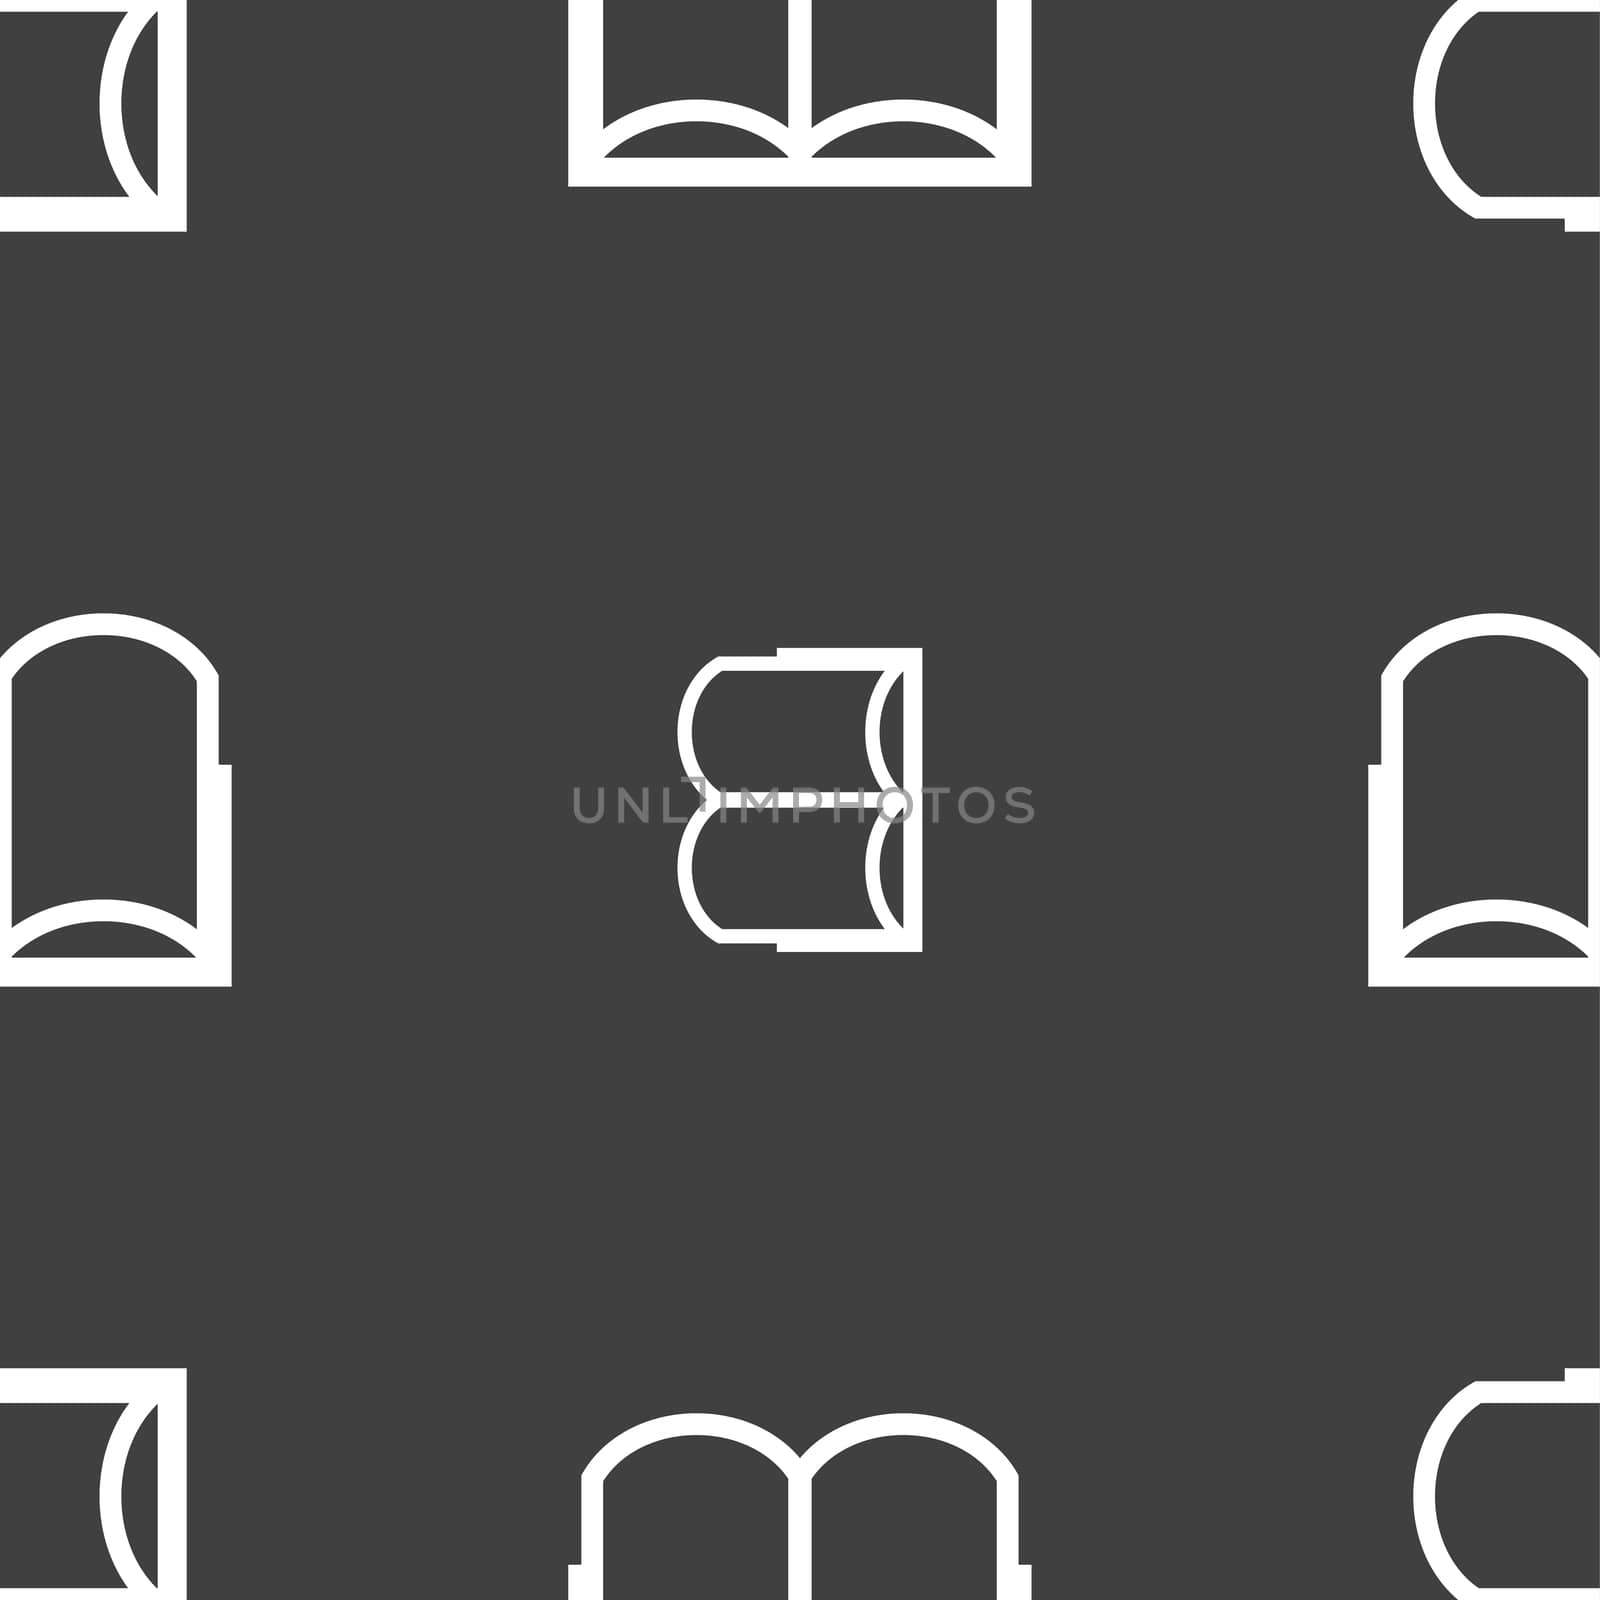 Book sign icon. Open book symbol. Seamless pattern on a gray background. illustration